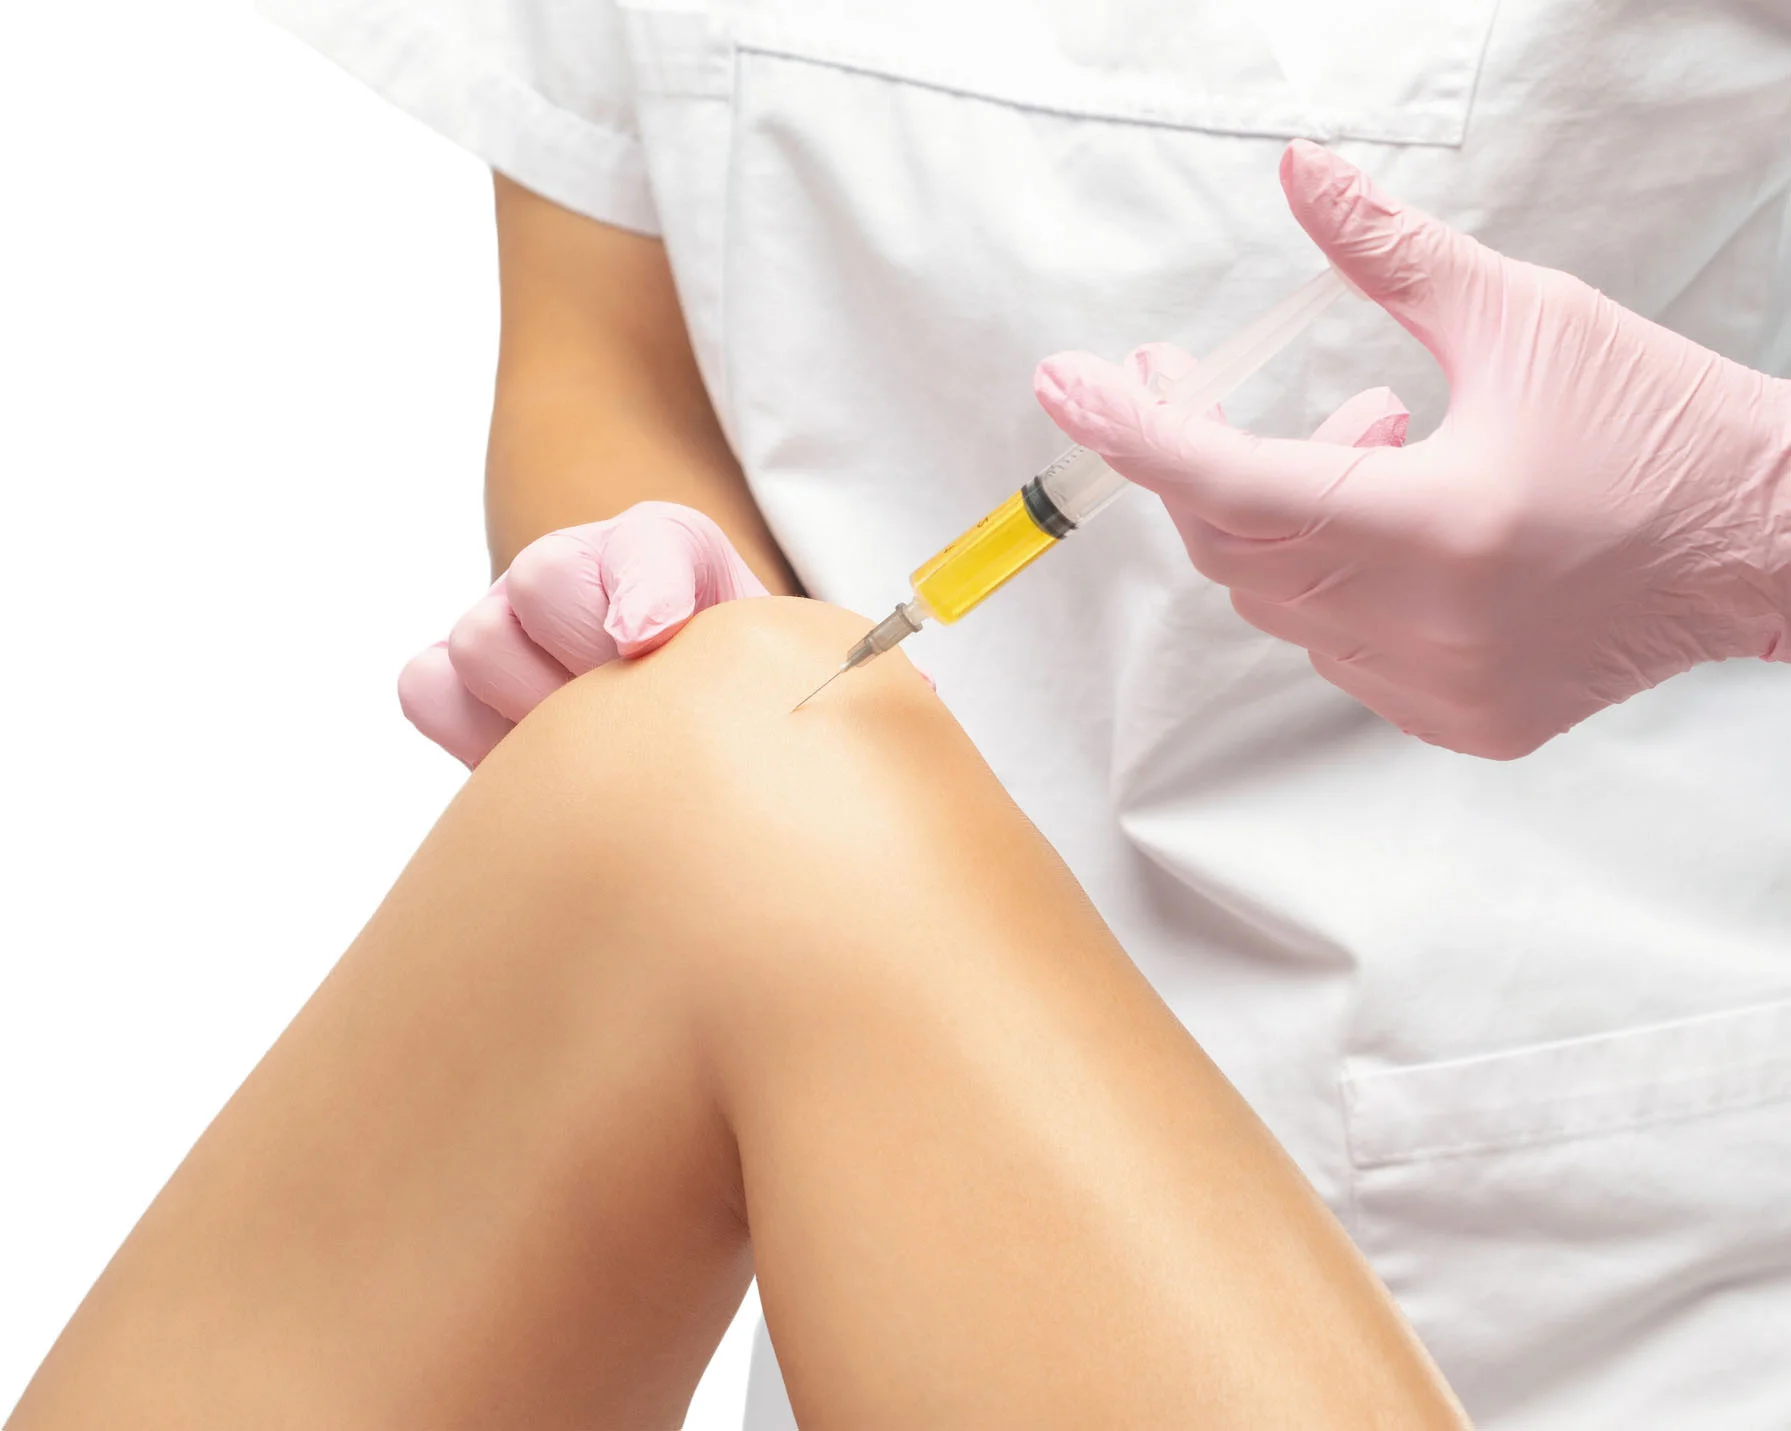 PRP for Knees and Joints